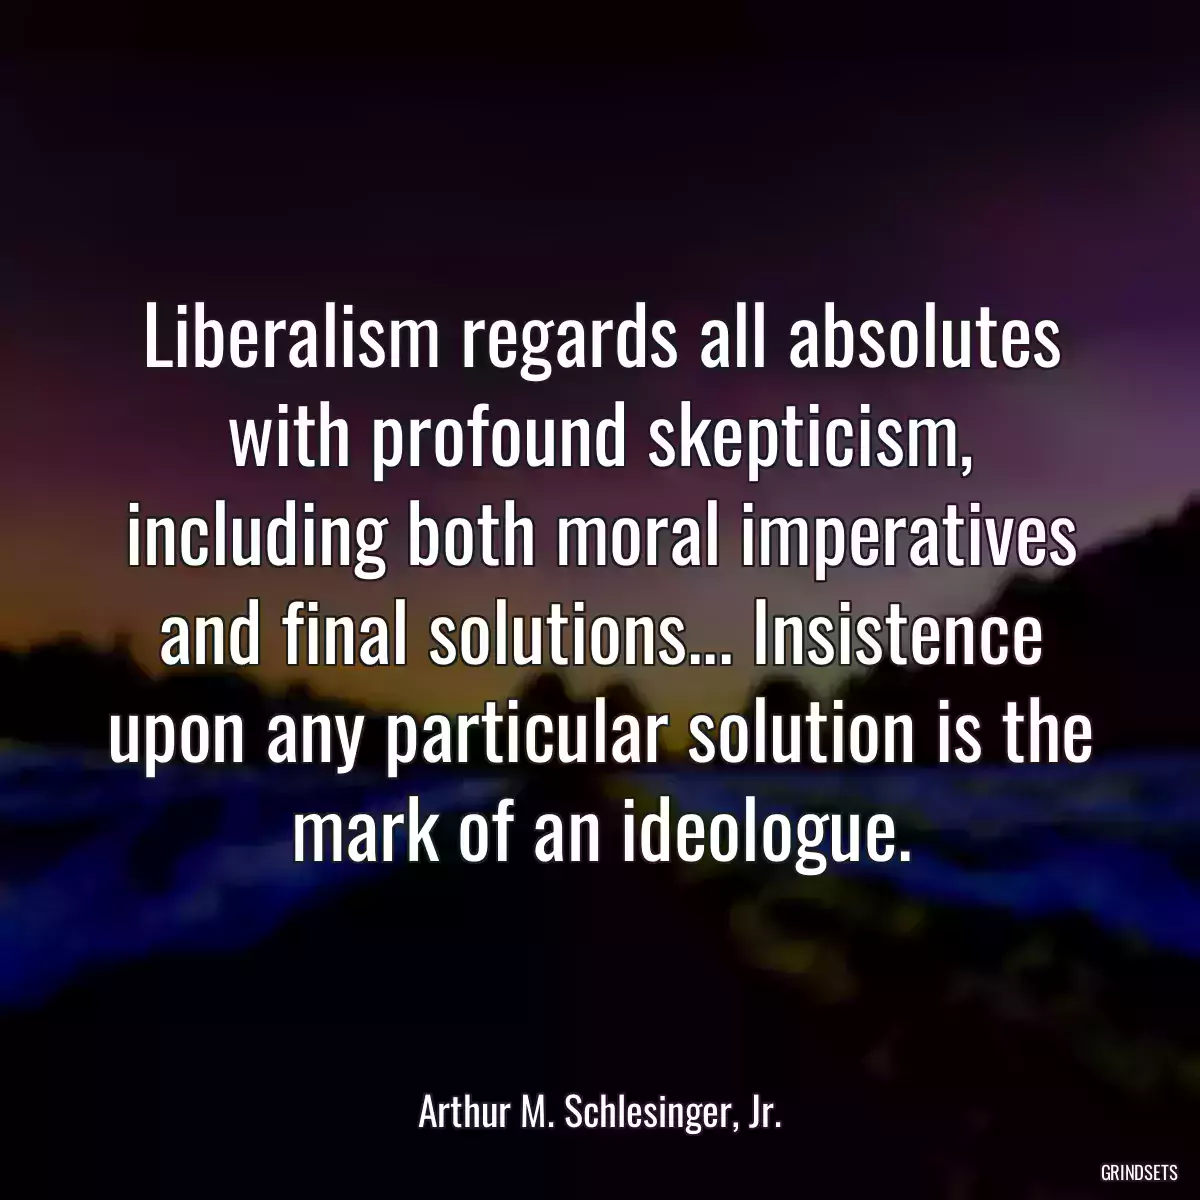 Liberalism regards all absolutes with profound skepticism, including both moral imperatives and final solutions... Insistence upon any particular solution is the mark of an ideologue.